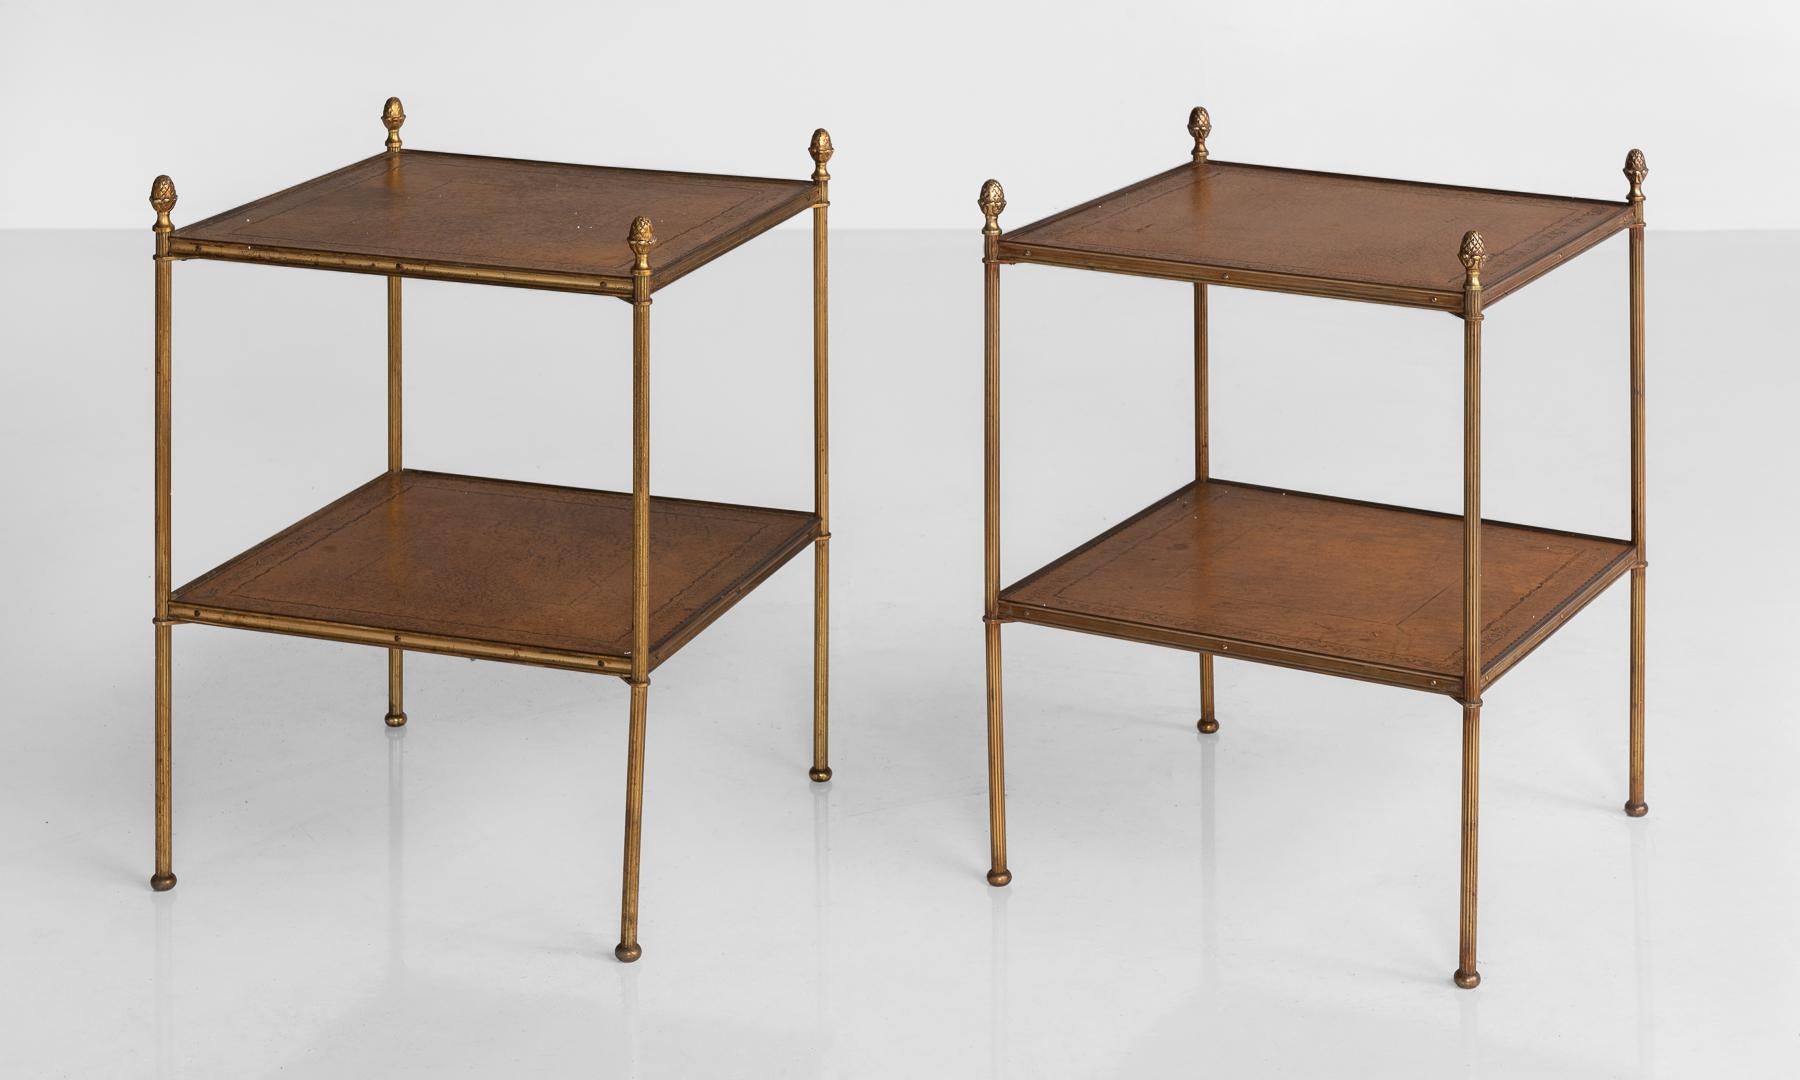 Pair of brass and leather end tables, circa 1930.

Brass structure with leather top and shelves that include gold patterned motif detailing. Made in London.

Measures: 20.25